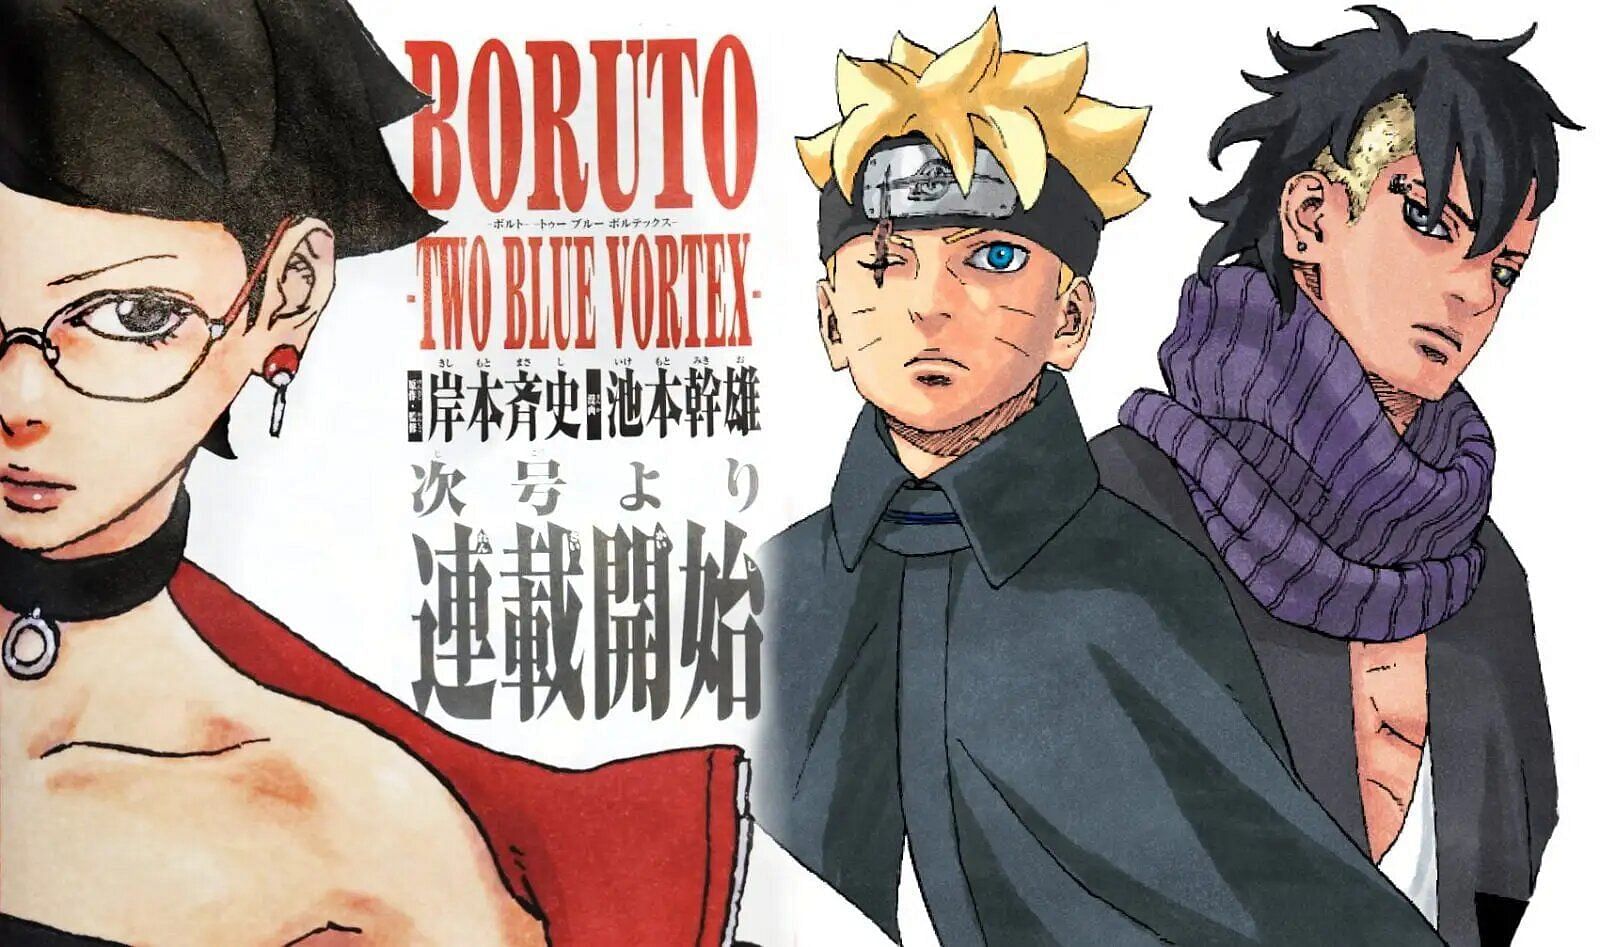 BORUTO: TWO BLUE VORTEX CHAPTER 5 will Release on December 20